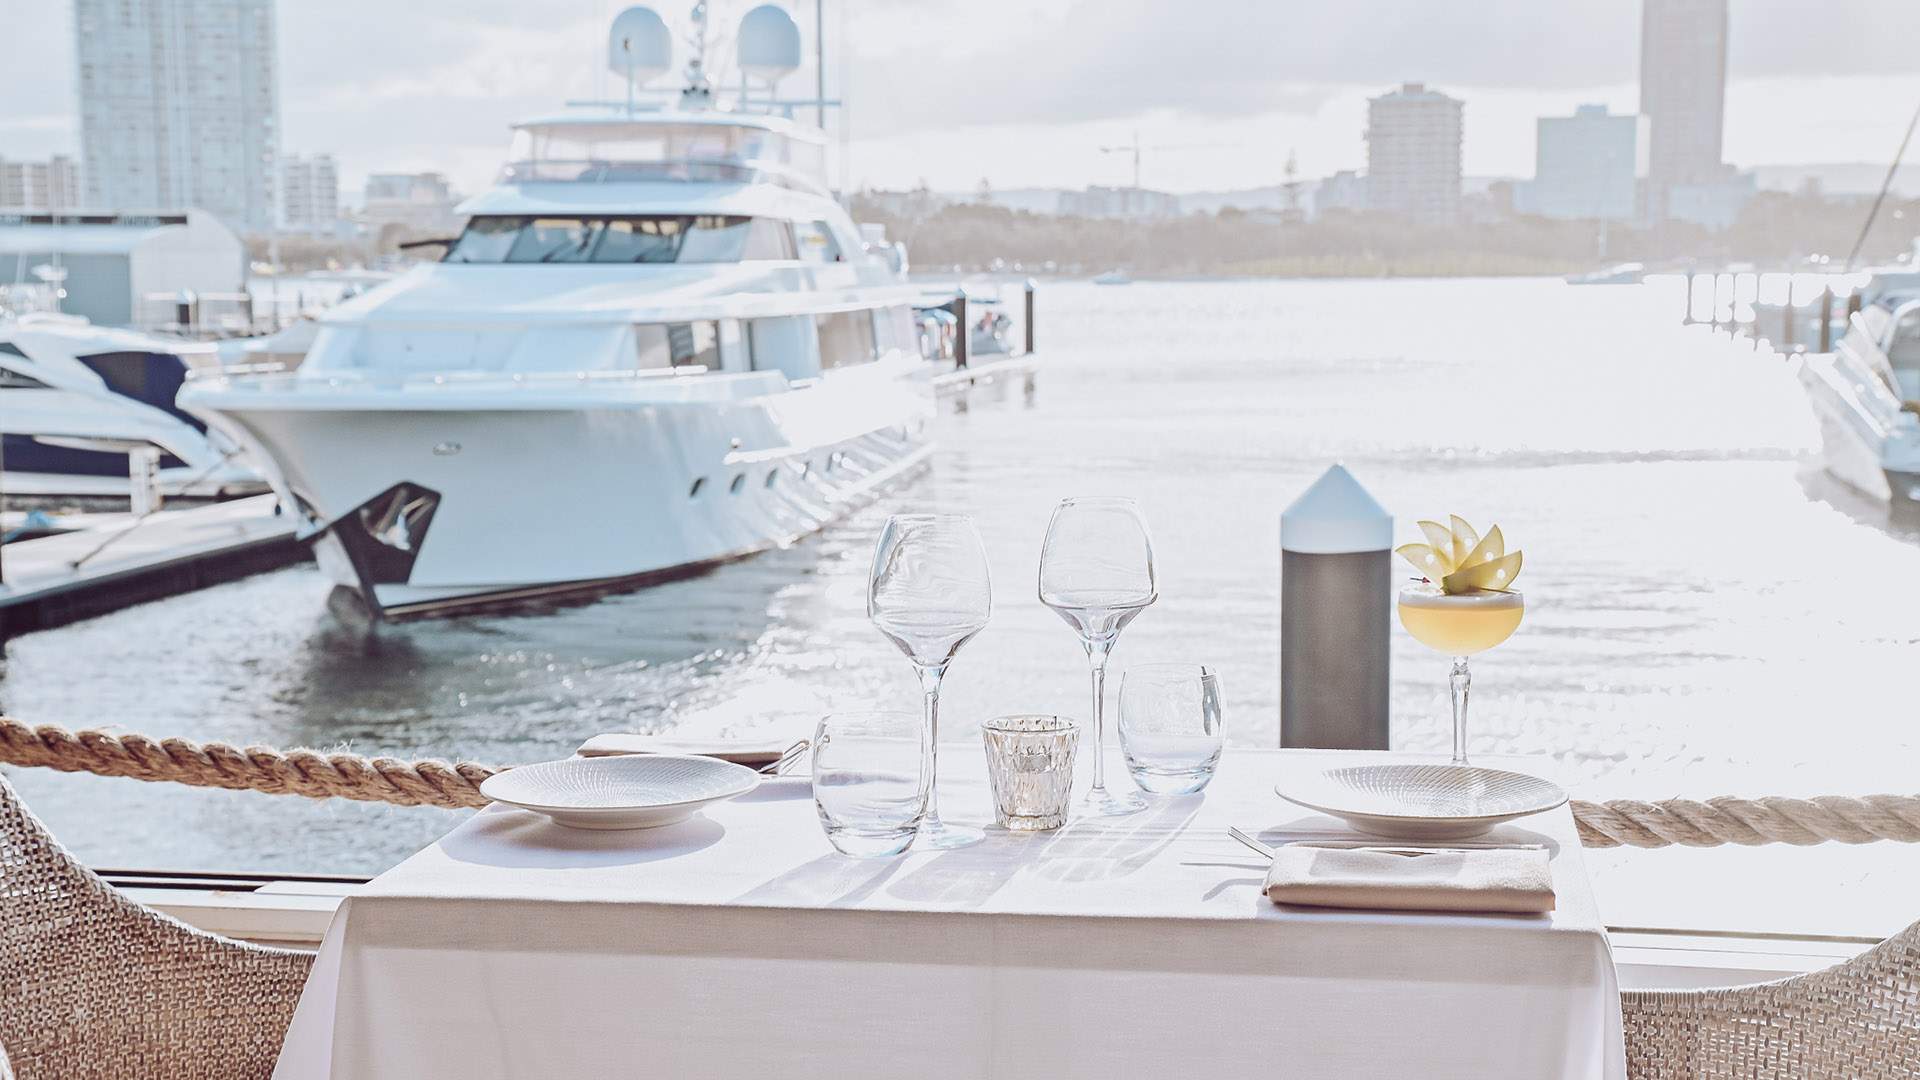 The Gold Coast's Soon-to-Launch Floating Beach Club Has Just Opened Its Waterside Restaurant